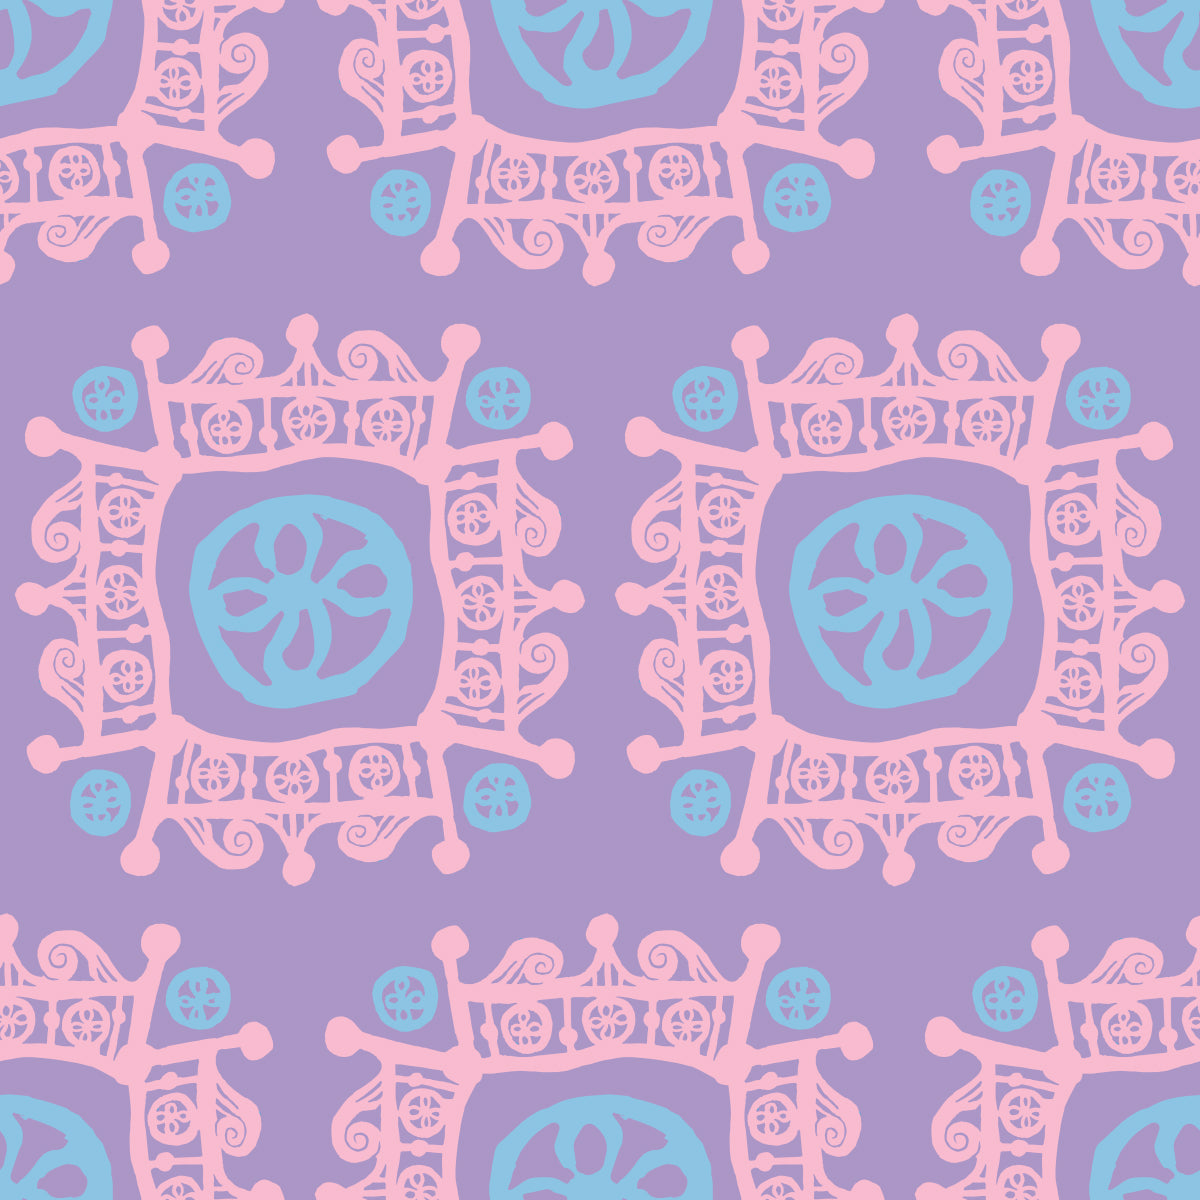 Rock on Royal Dawn features a repeating pattern in purple, pink, and blue colors of hand-drawn flowers encased in ornate squares bordered by crown-like flourishes.